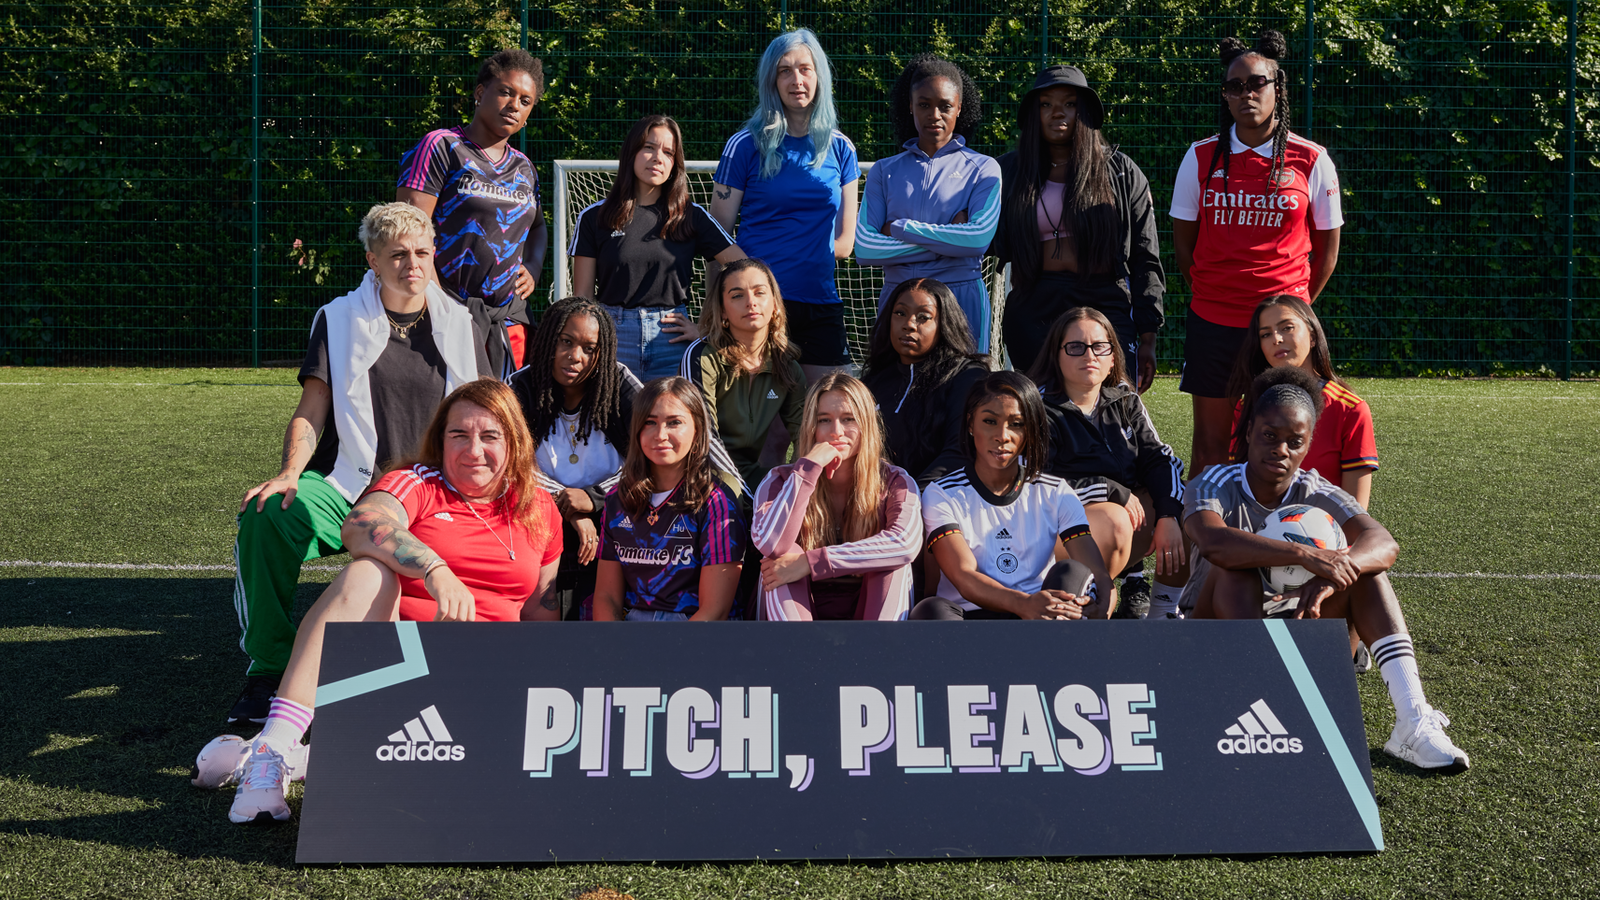 Women's Euros: Adidas to provide dedicated pitches for women, girls and non-bina..